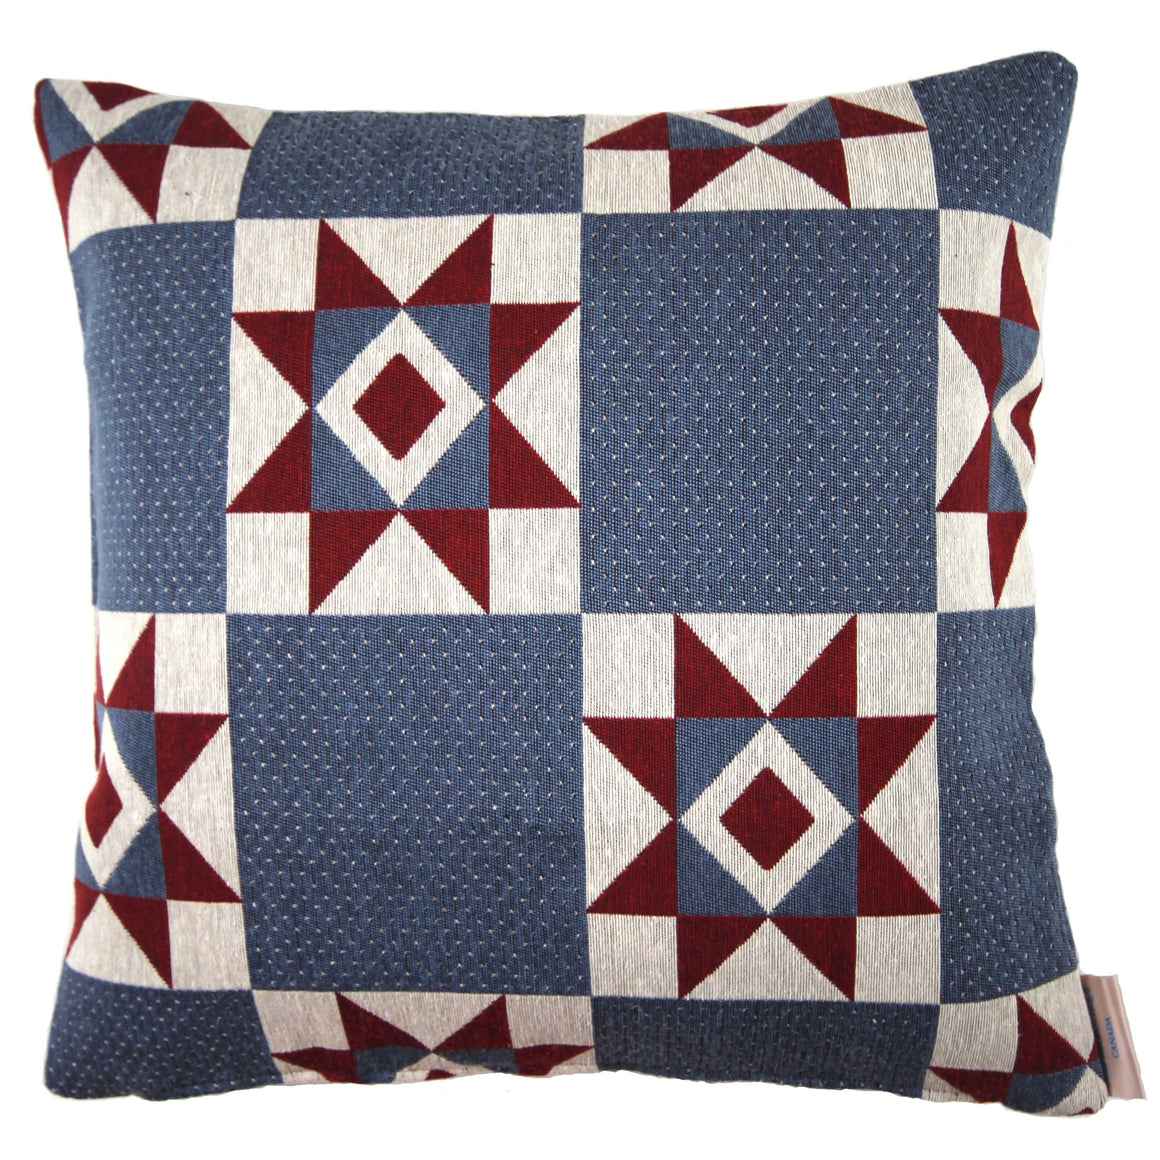 Georgina - Blue, Red and Beige Geometric Country Star Pillow Cover - 20x20